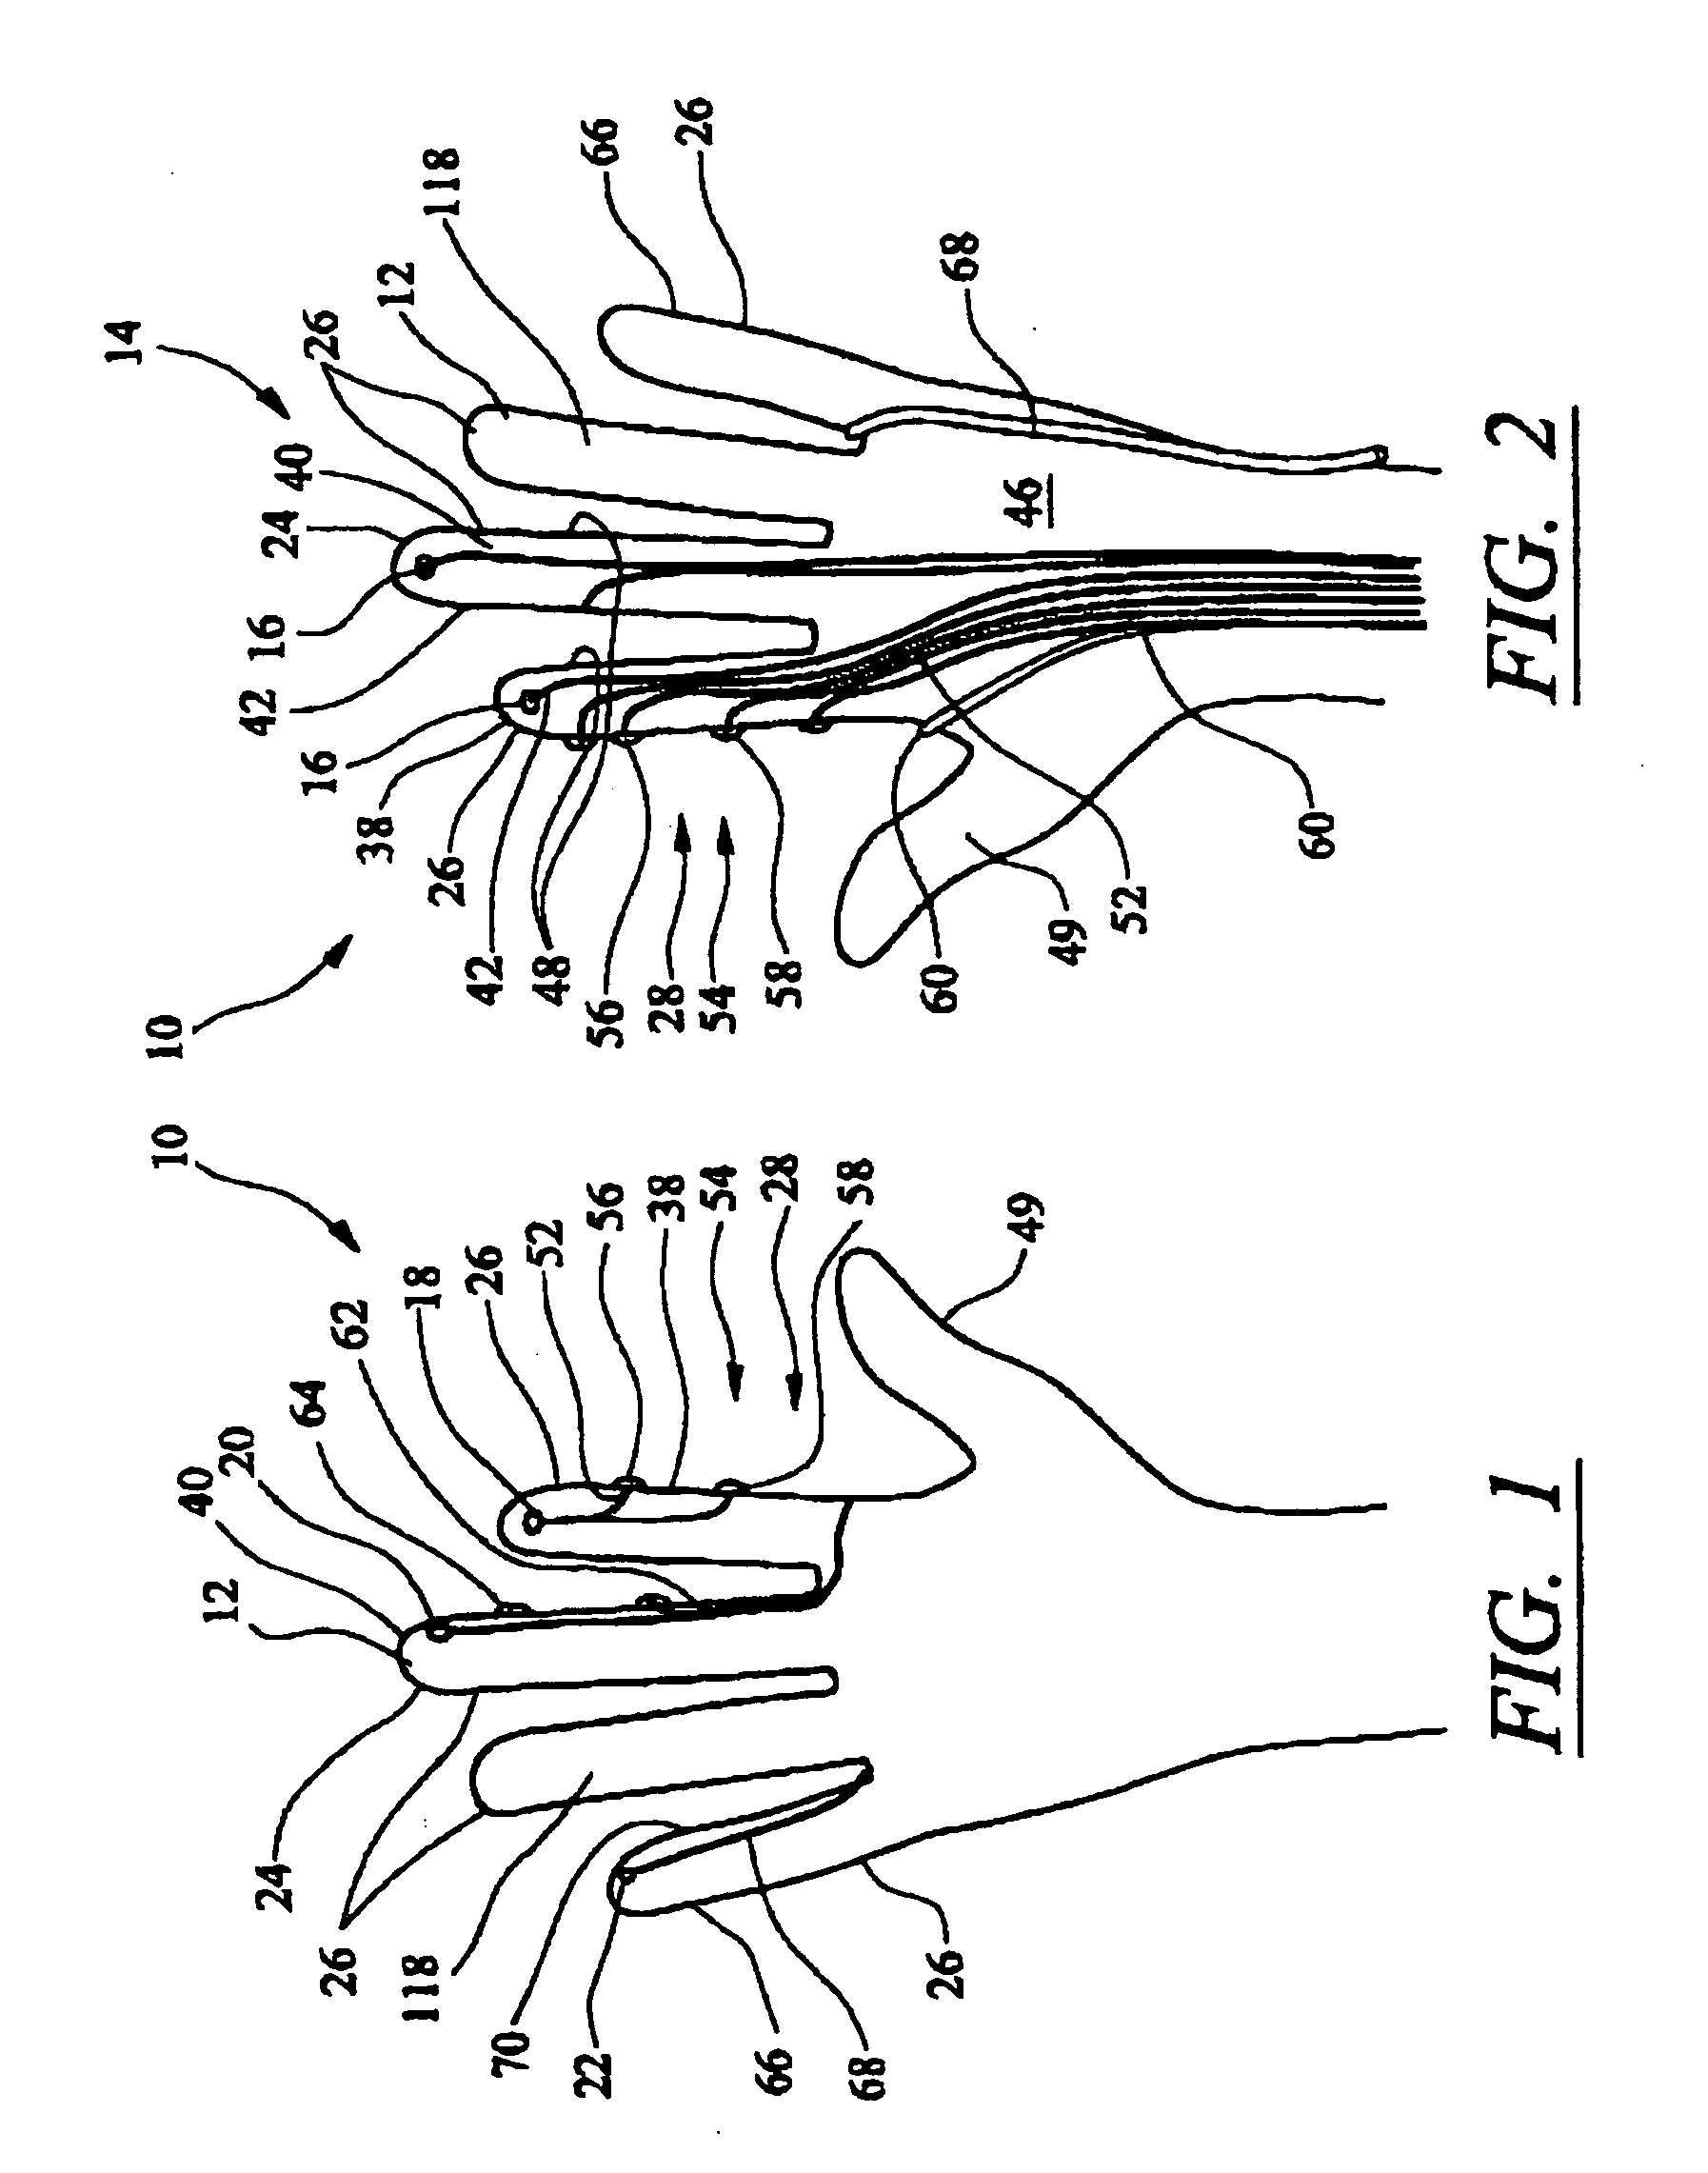 Surgical glove system